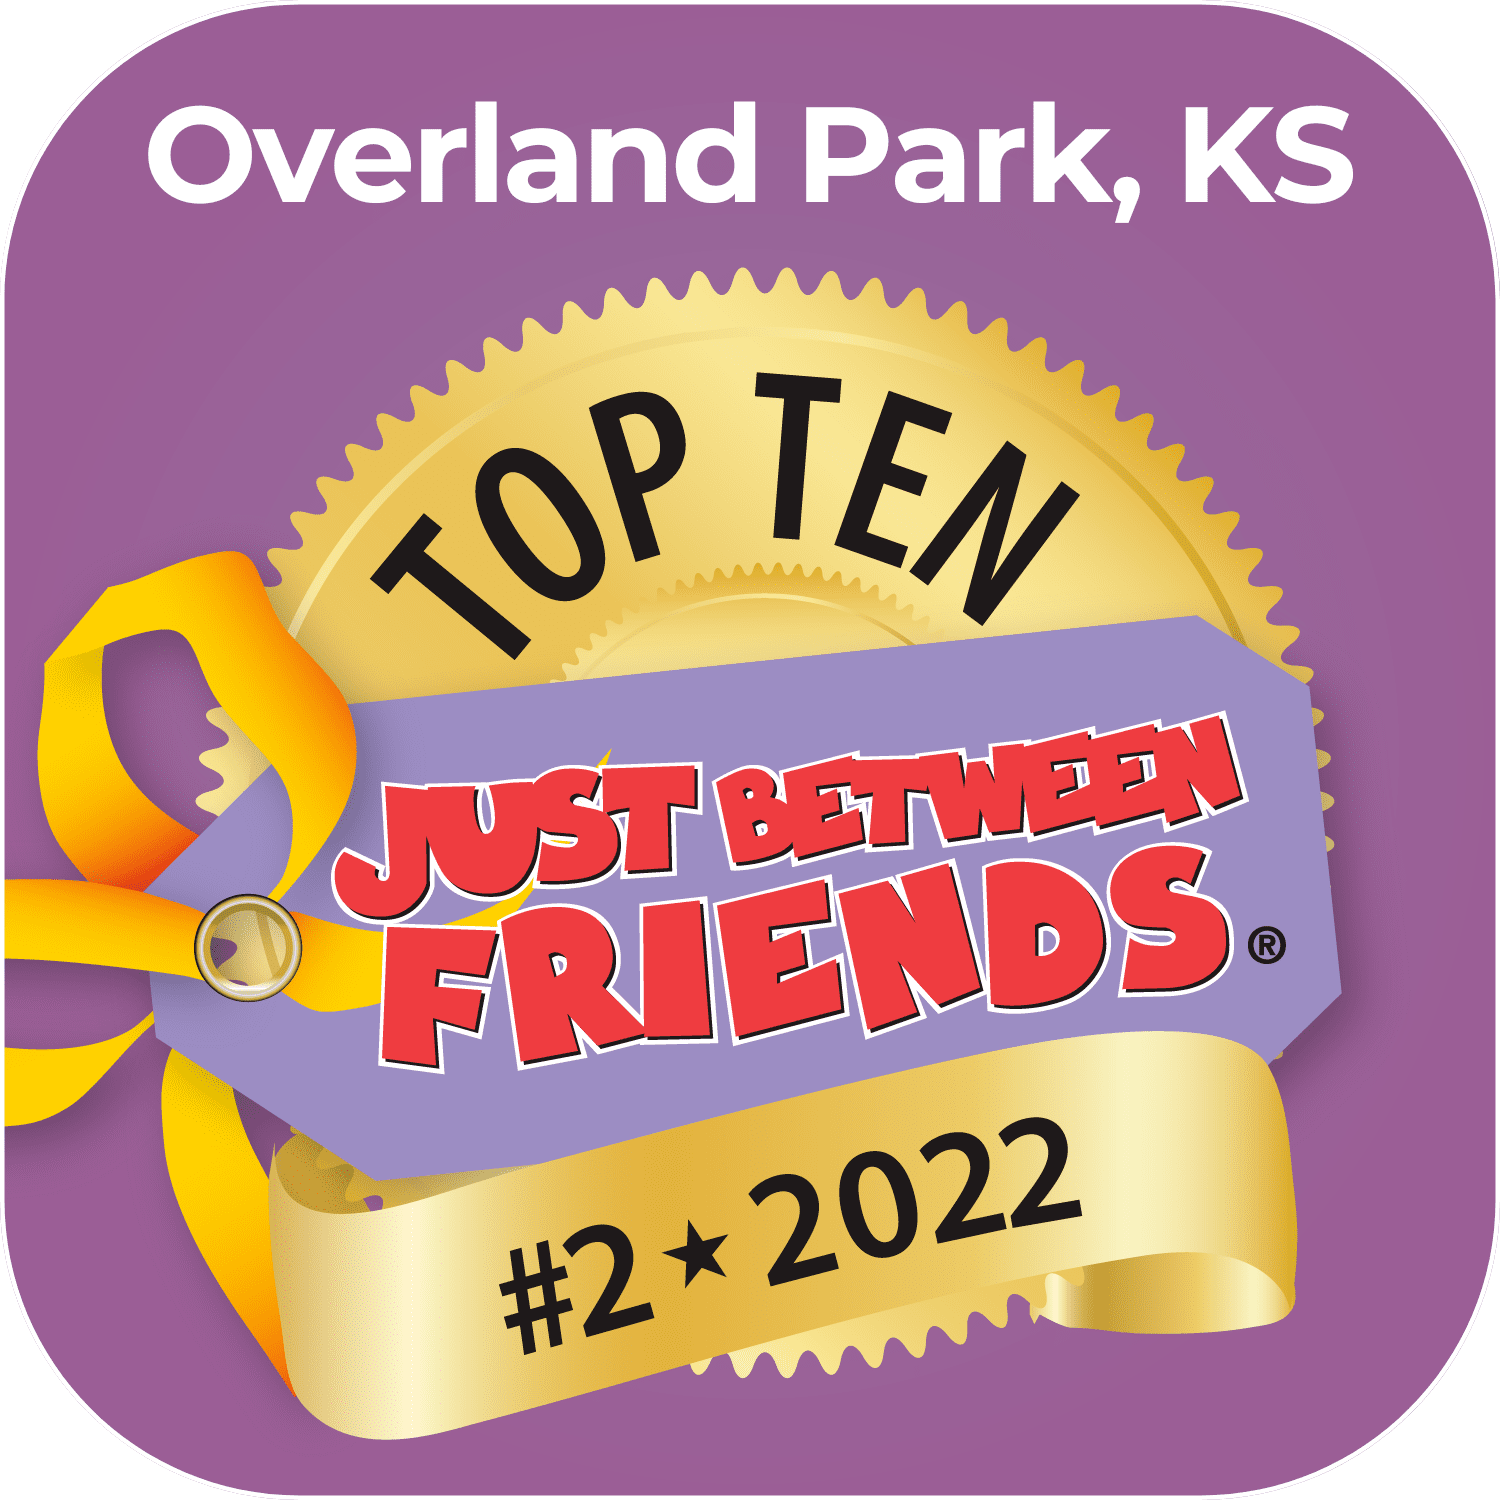 The Overland Park, KS sale was the #2 sale in the nation in 2022.